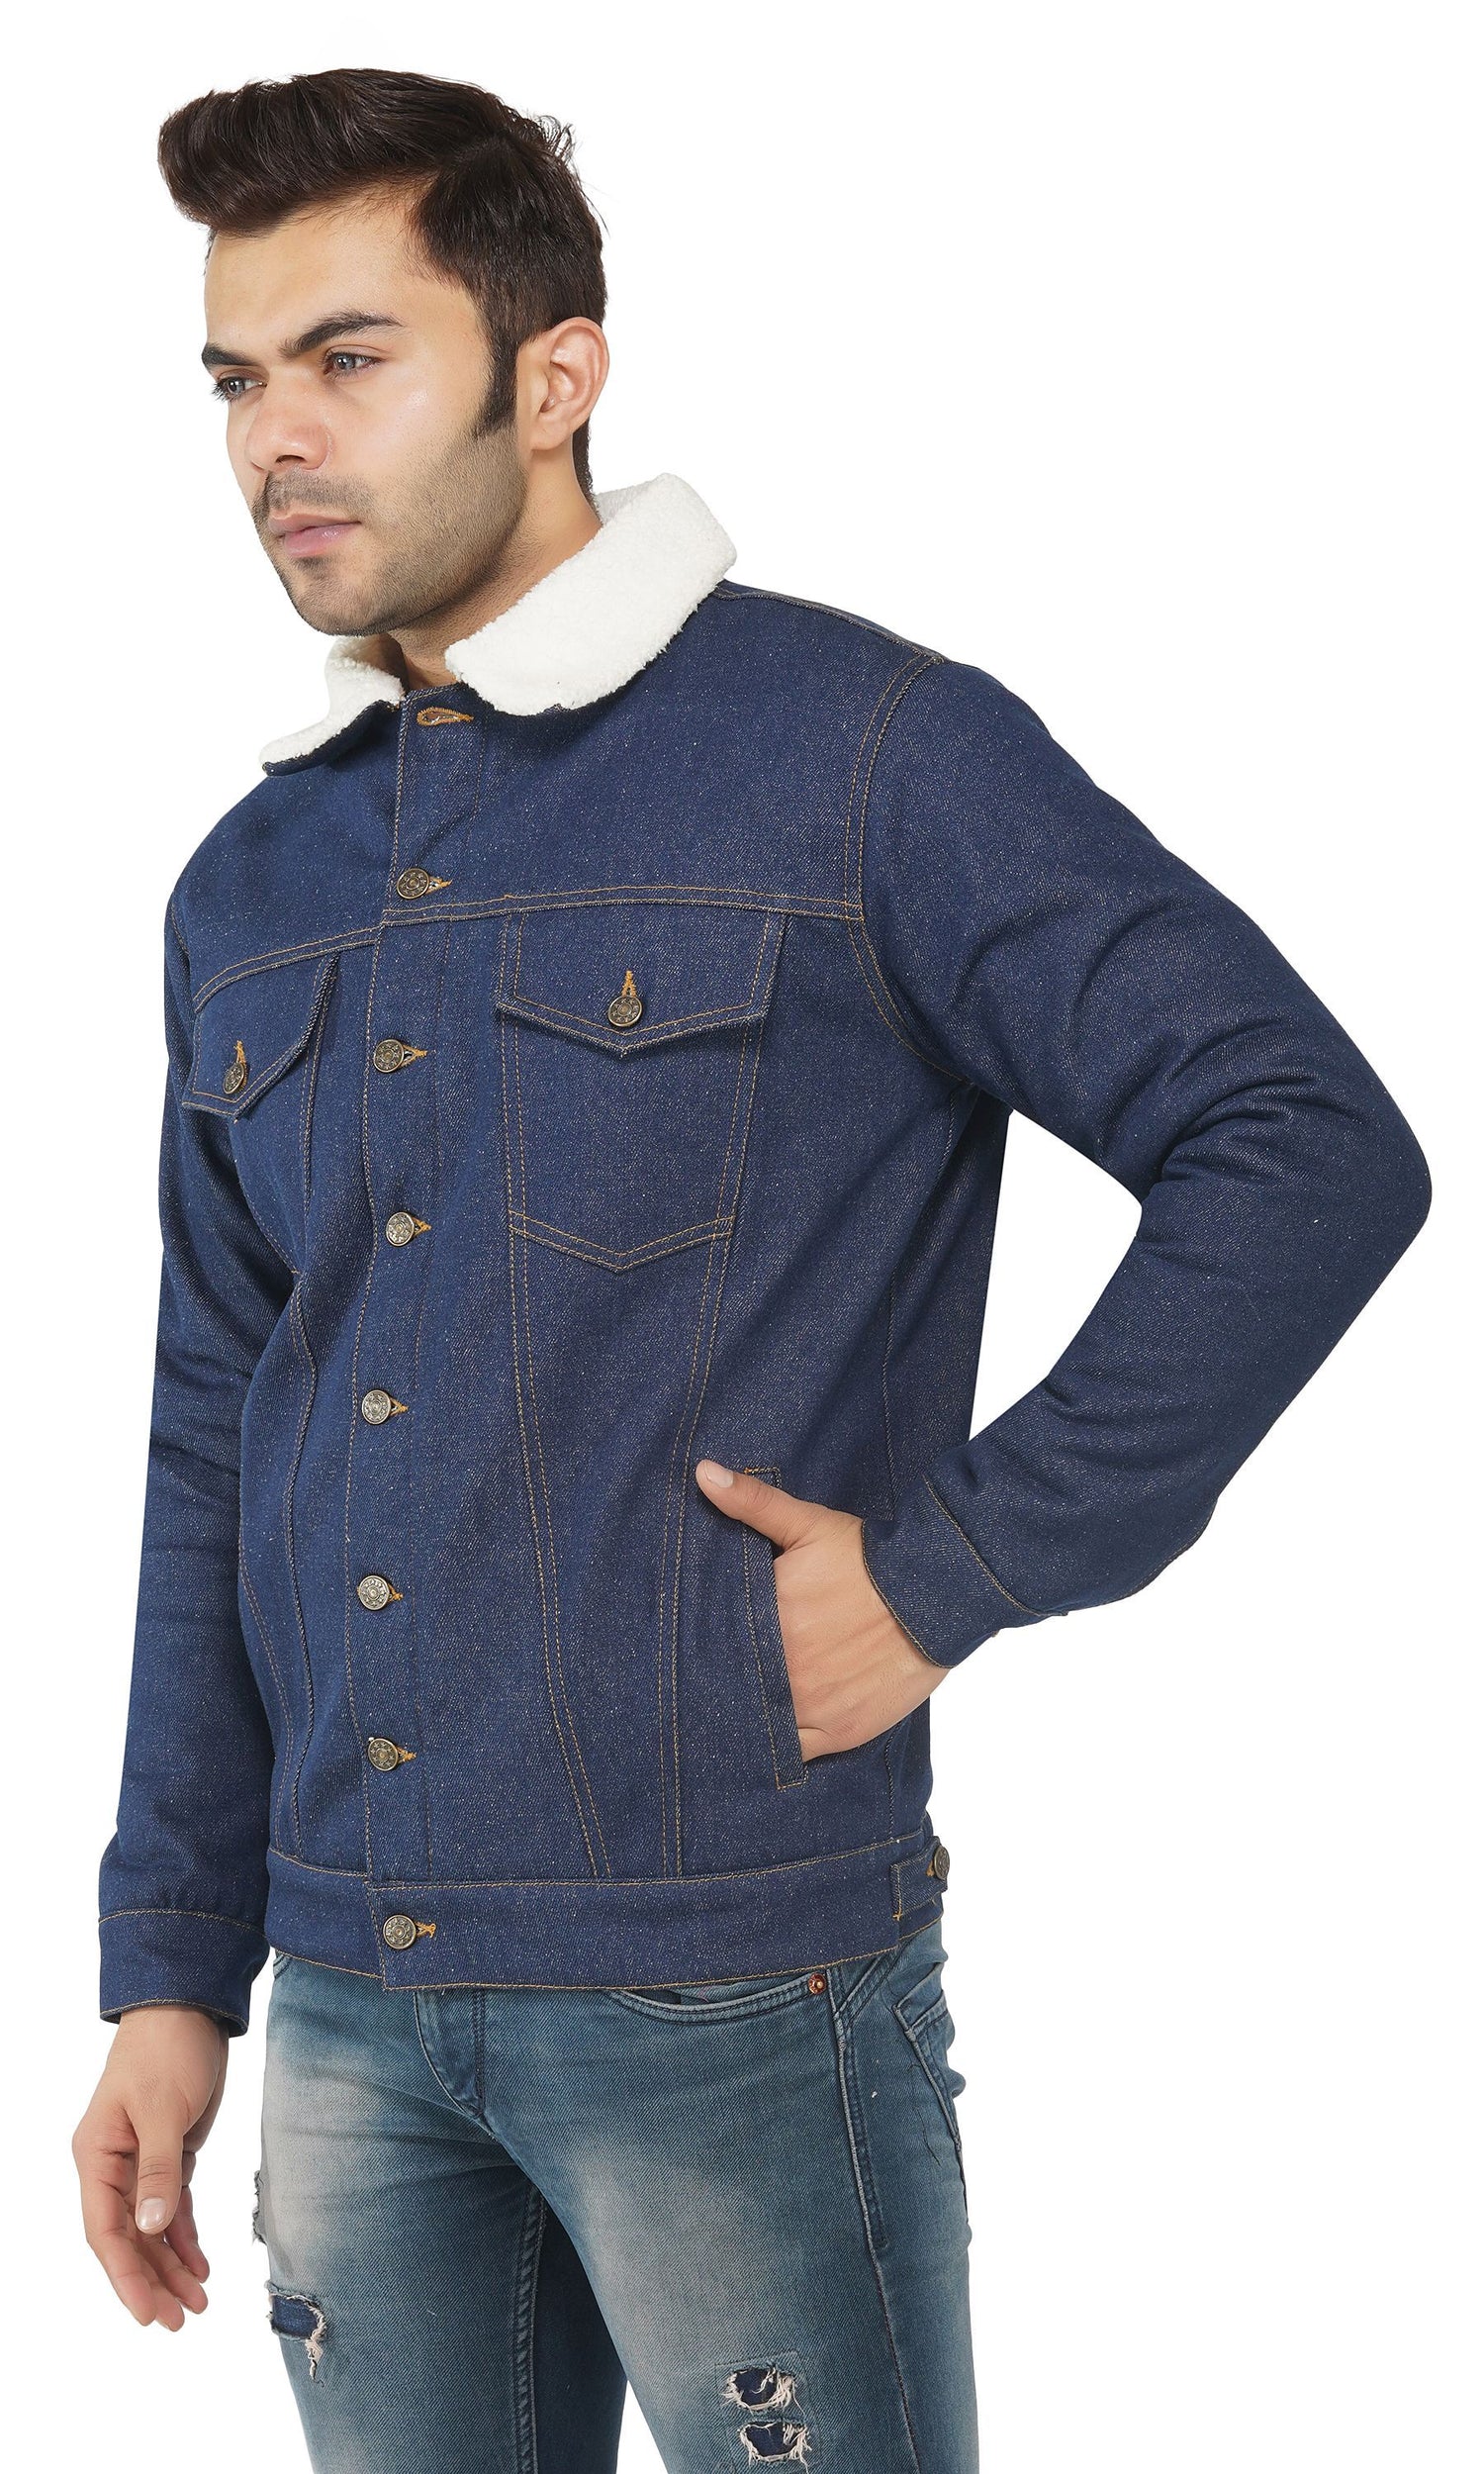 SLAY. Men's Winter Wear Navy Blue Cotton Biker Faux Fur Denim Jacket with SLAY. Embroidered on the back-clothing-to-slay.myshopify.com-Jacket